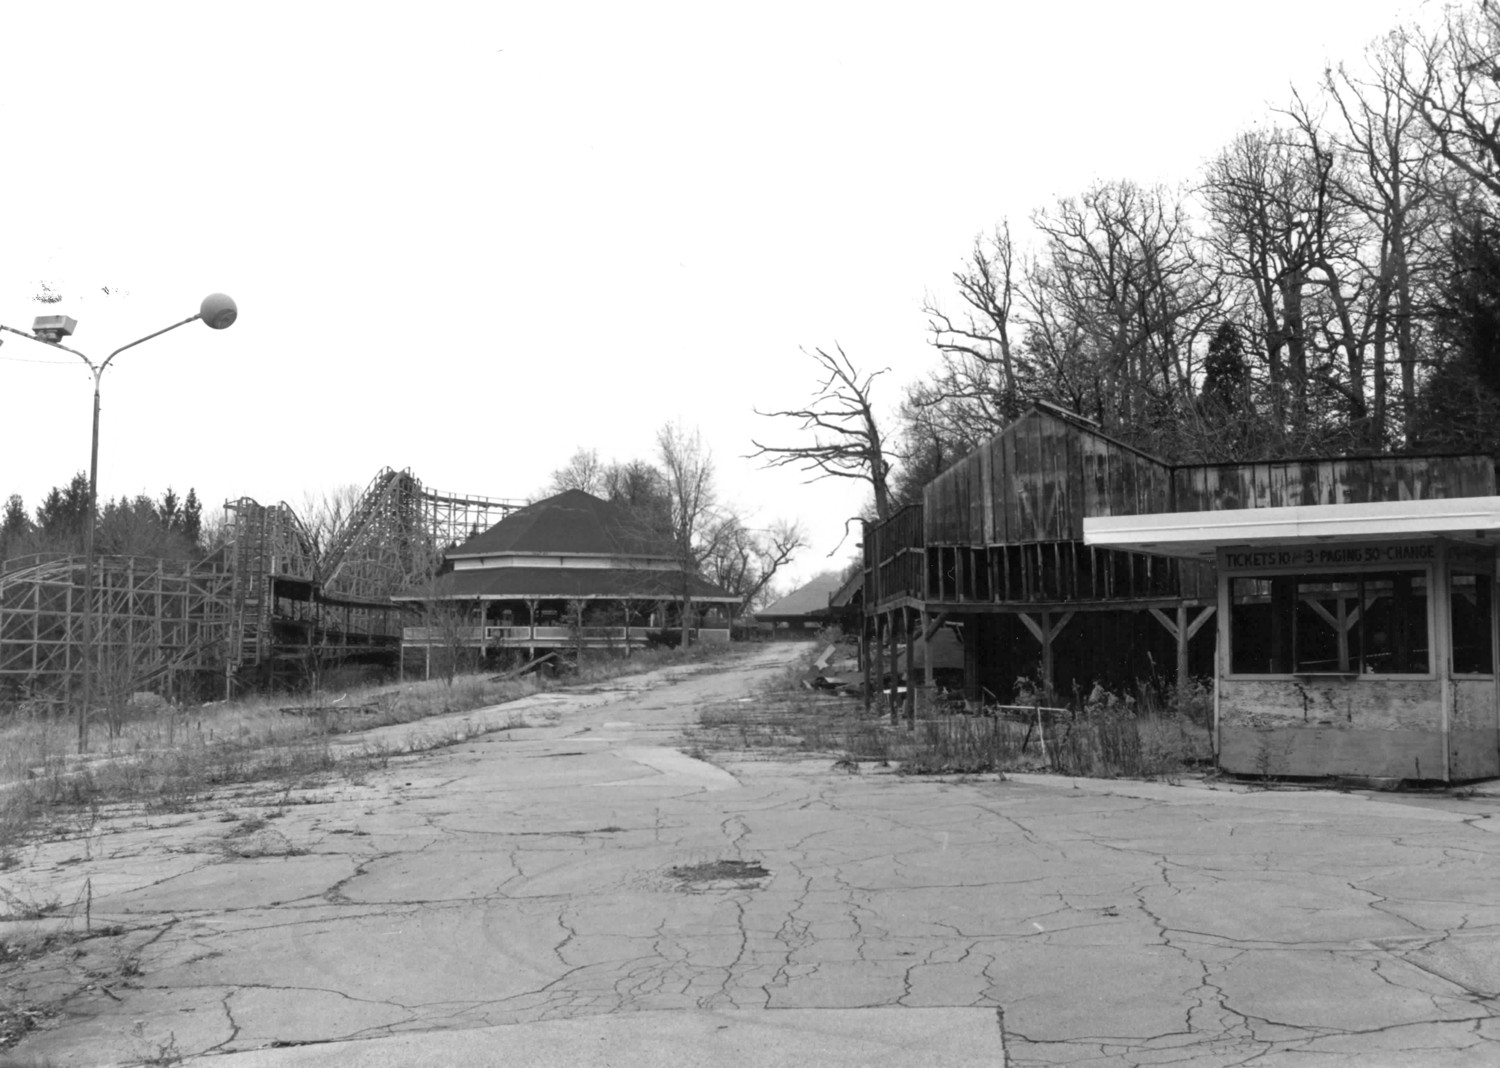 Idora Park, Youngstown Ohio Midway, looking north from the ballroom, showing the ticket booth at right and the merry-go-round and the Wildcat roller coaster at left (1992)